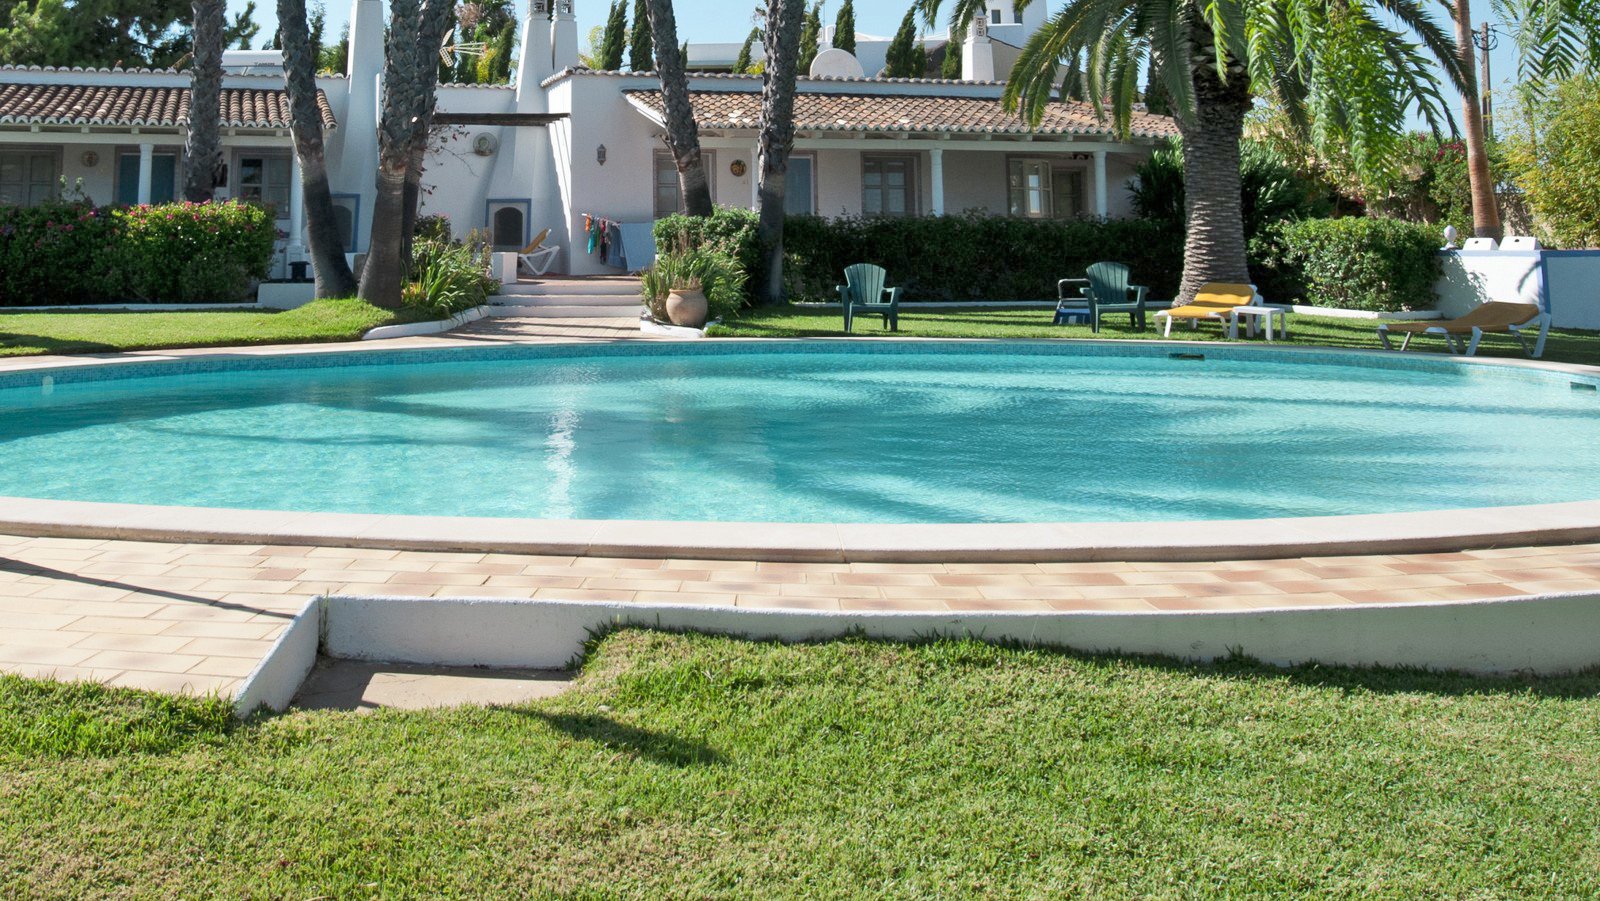 Our garden furniture can now be found on the patio of the luxury Villas Luz Romana in Portugal